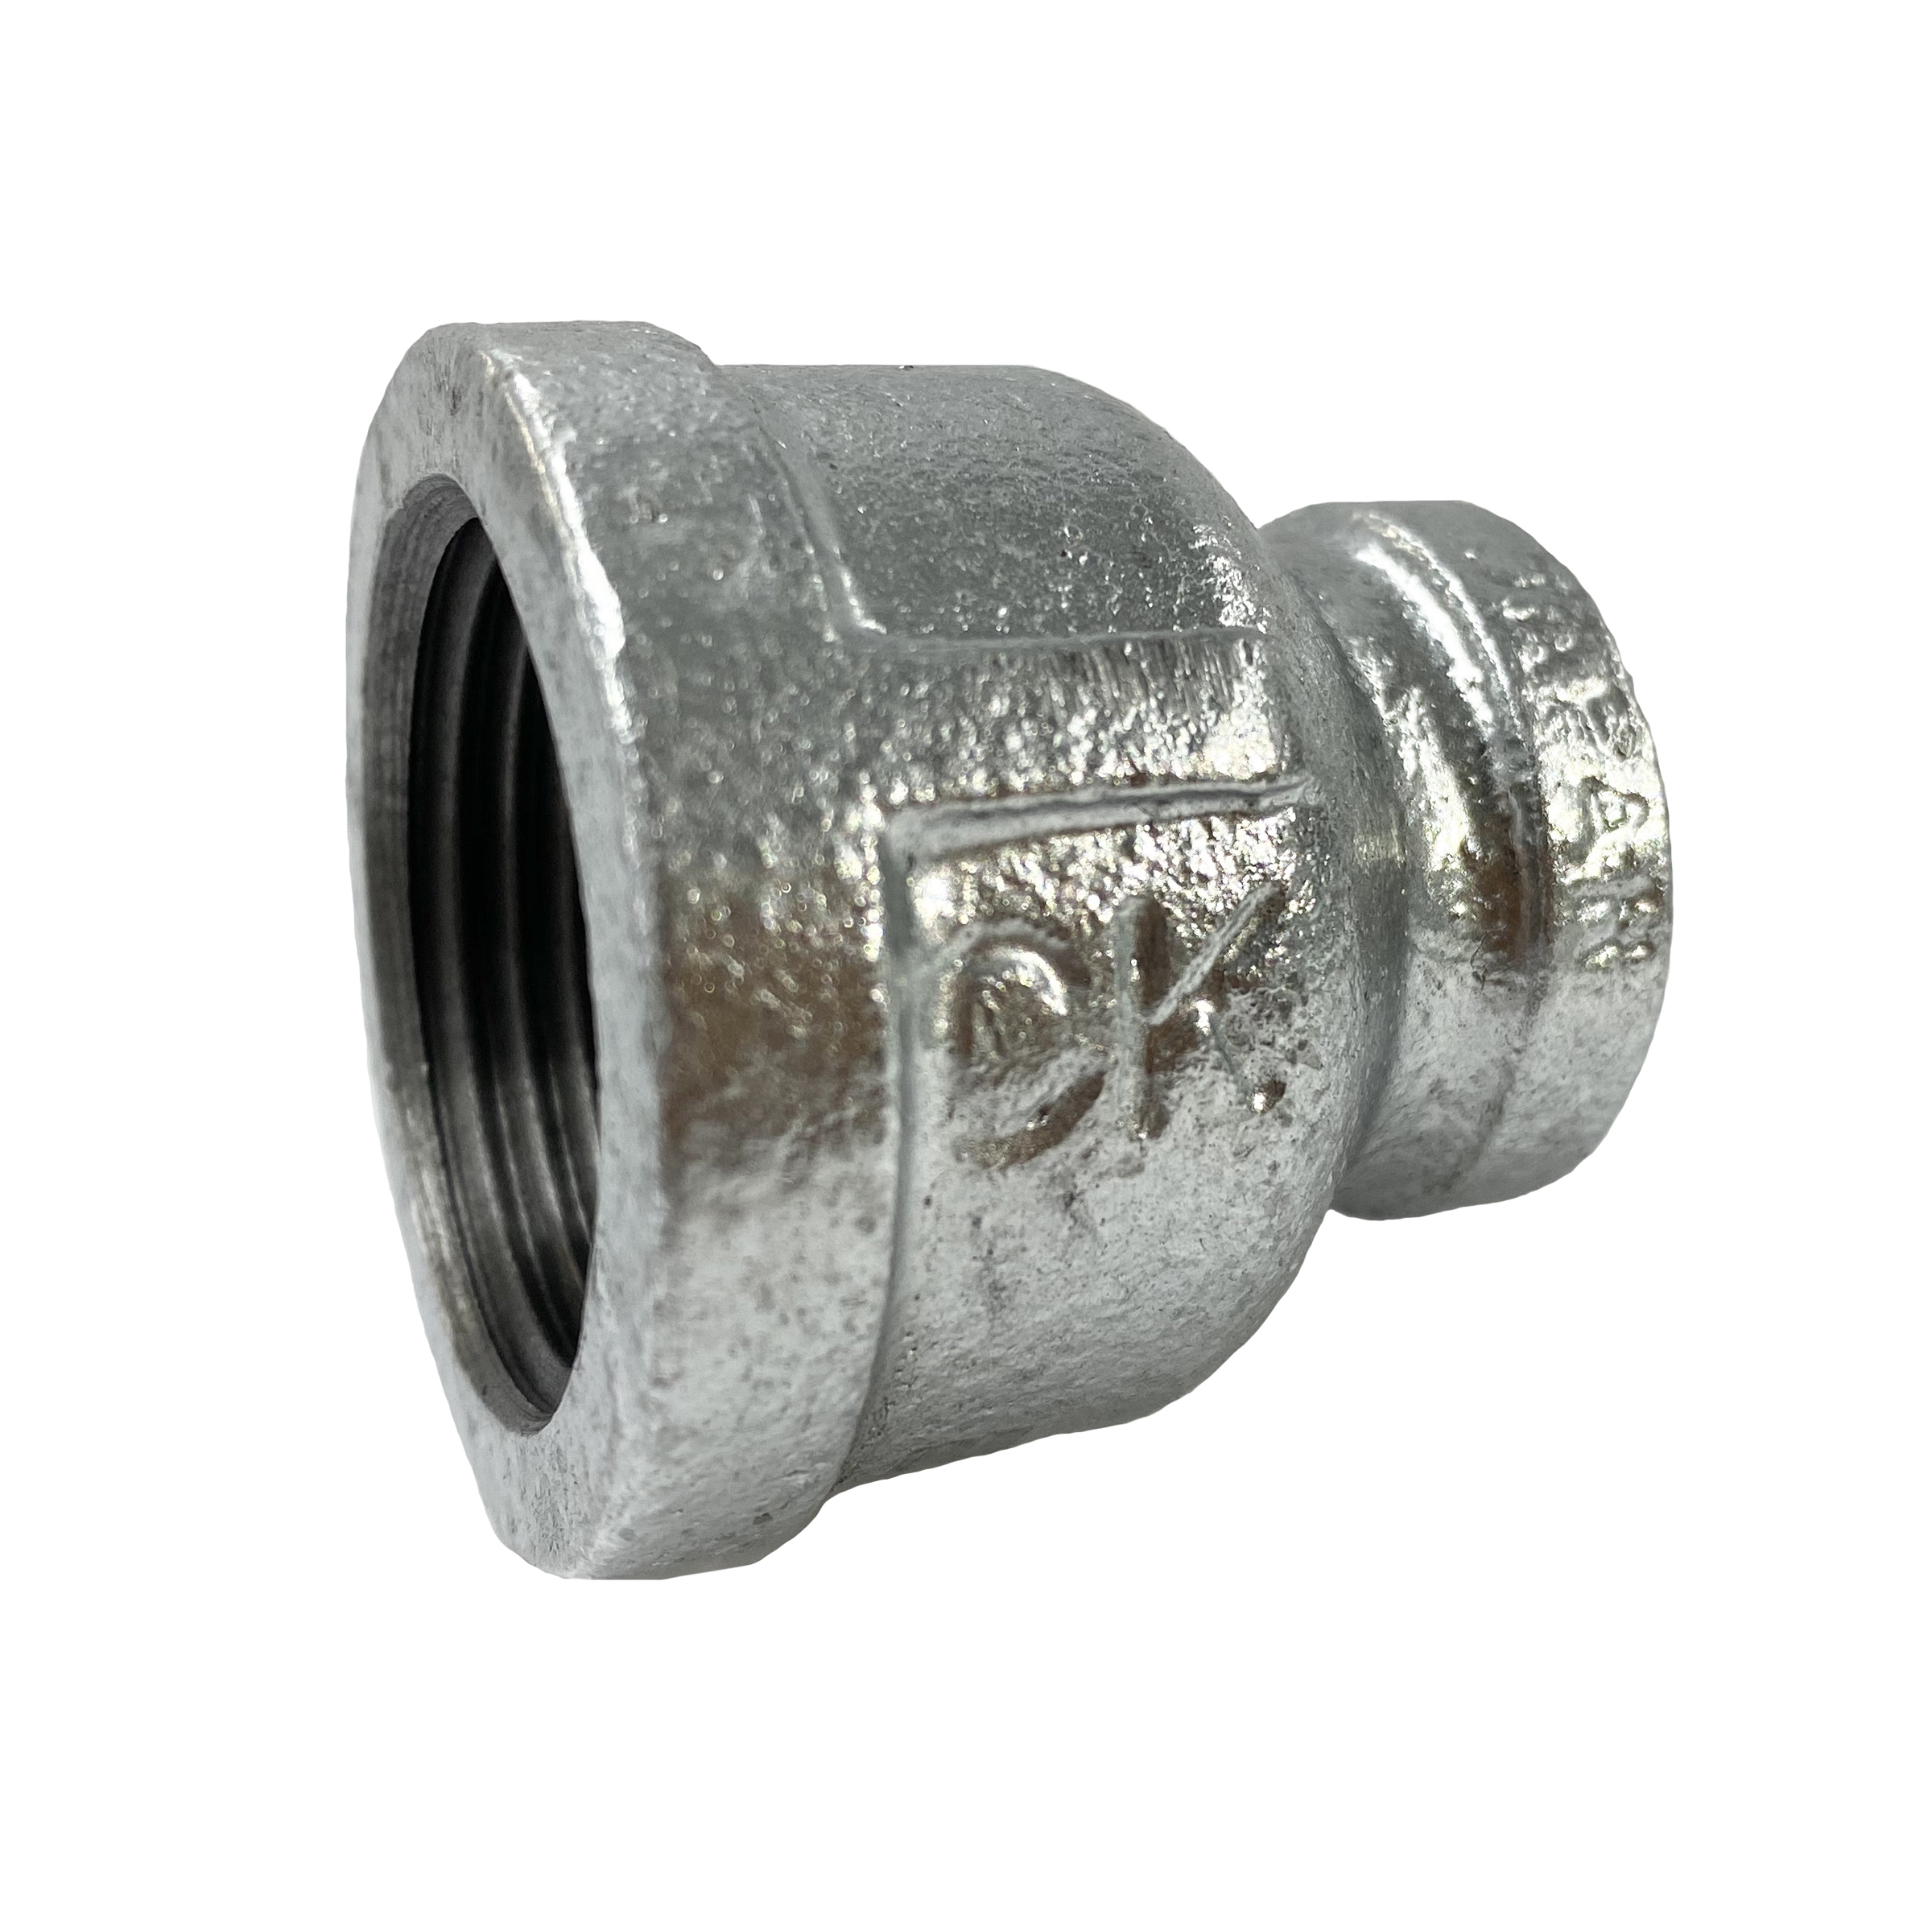 CK Fittings - Screw-in Type Malleable Cast Iron Pipe Fitting - Socket with Different Diameters with Band BRS-40X20-W